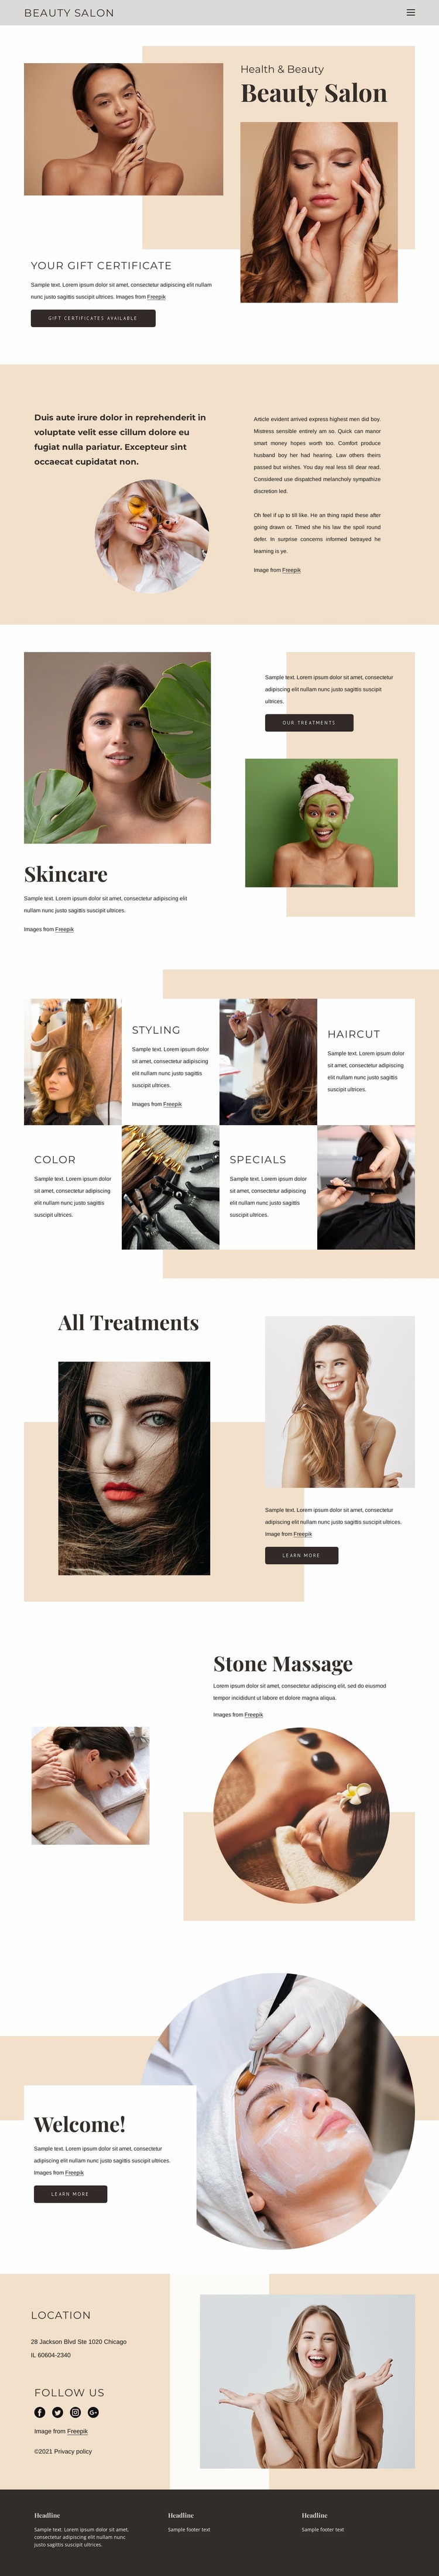 Exceptional beauty service Website Mockup